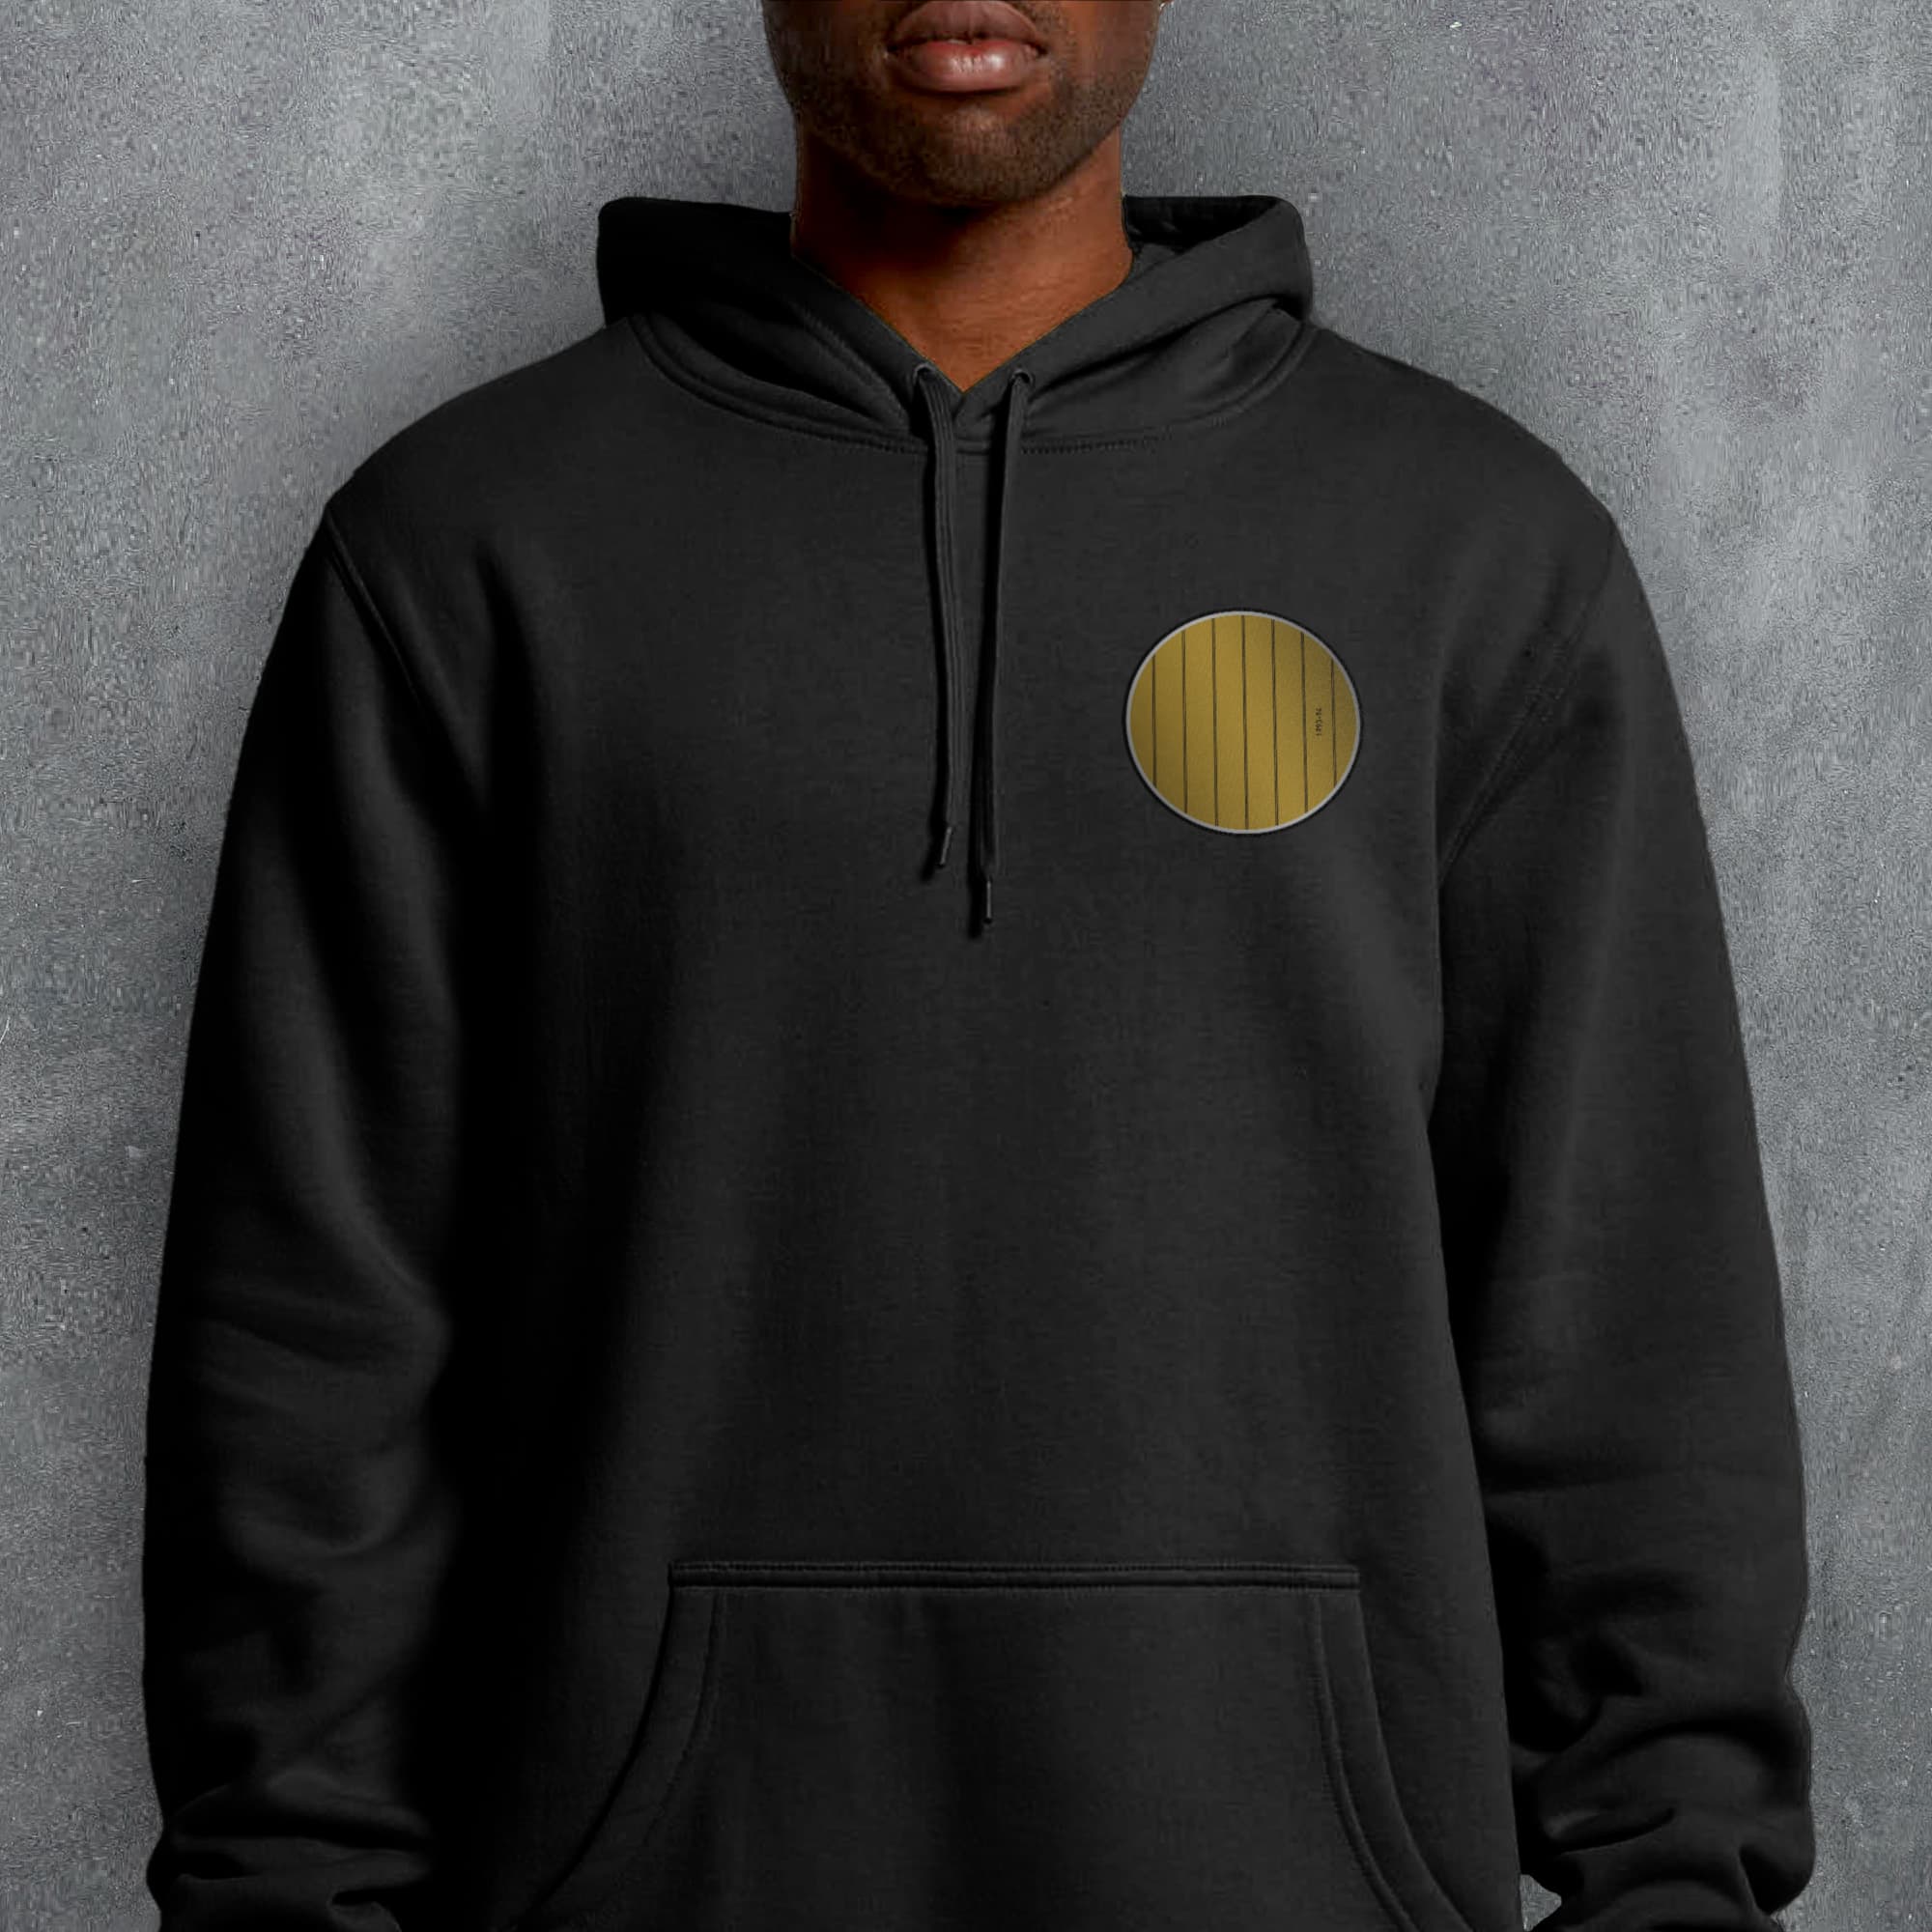 a man wearing a black hoodie with a gold circle on it